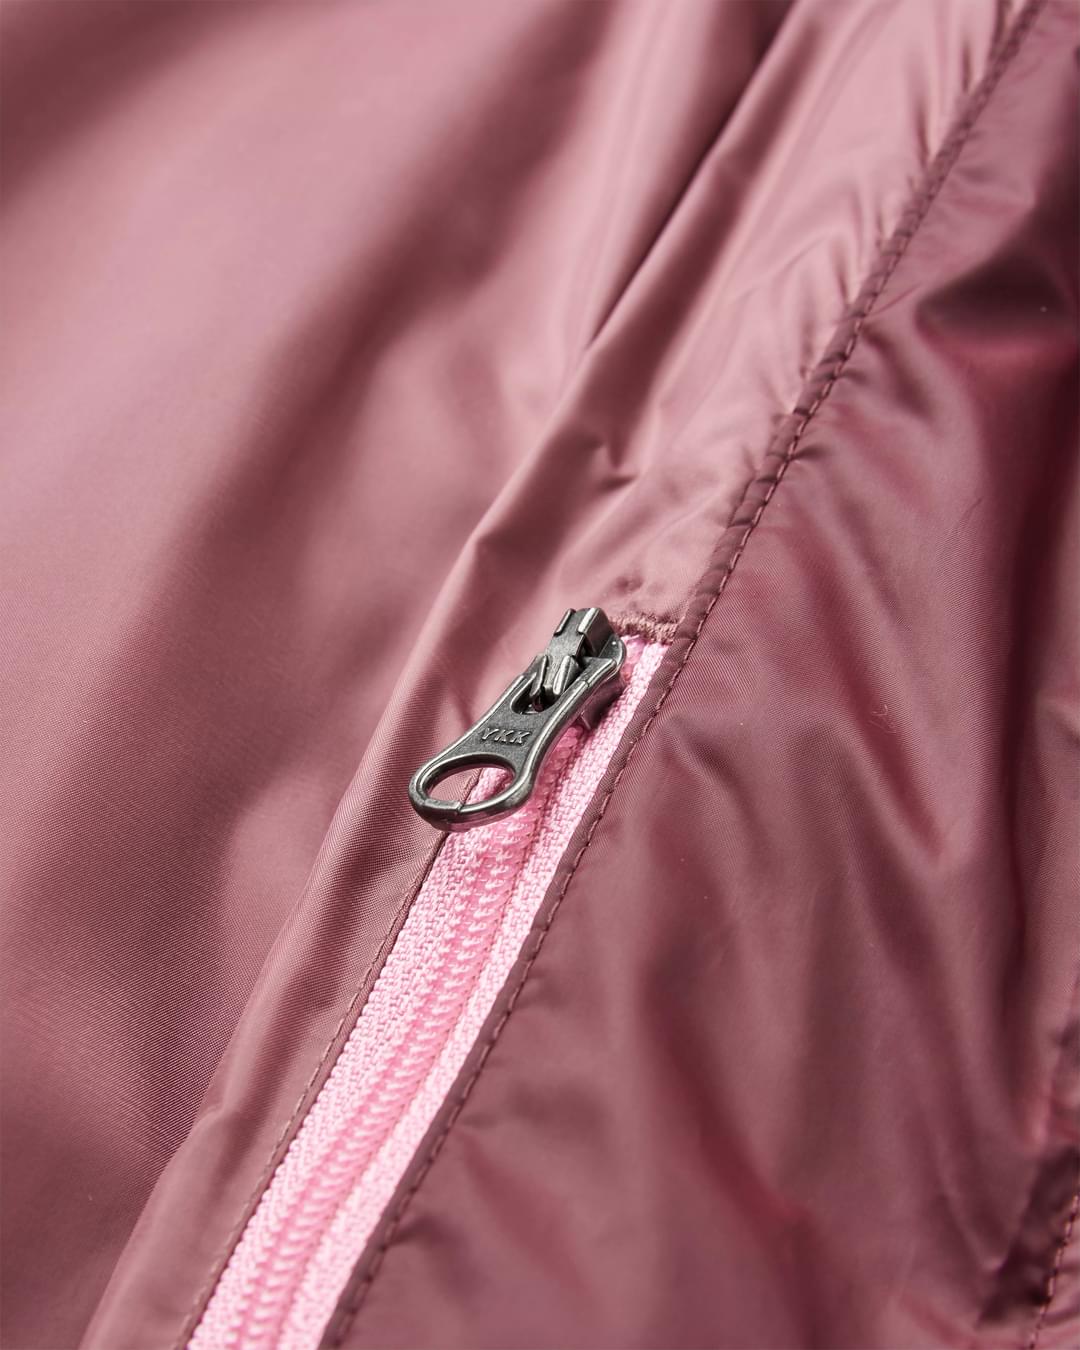 Flora 2.0 Long Insulated Jacket - Wine